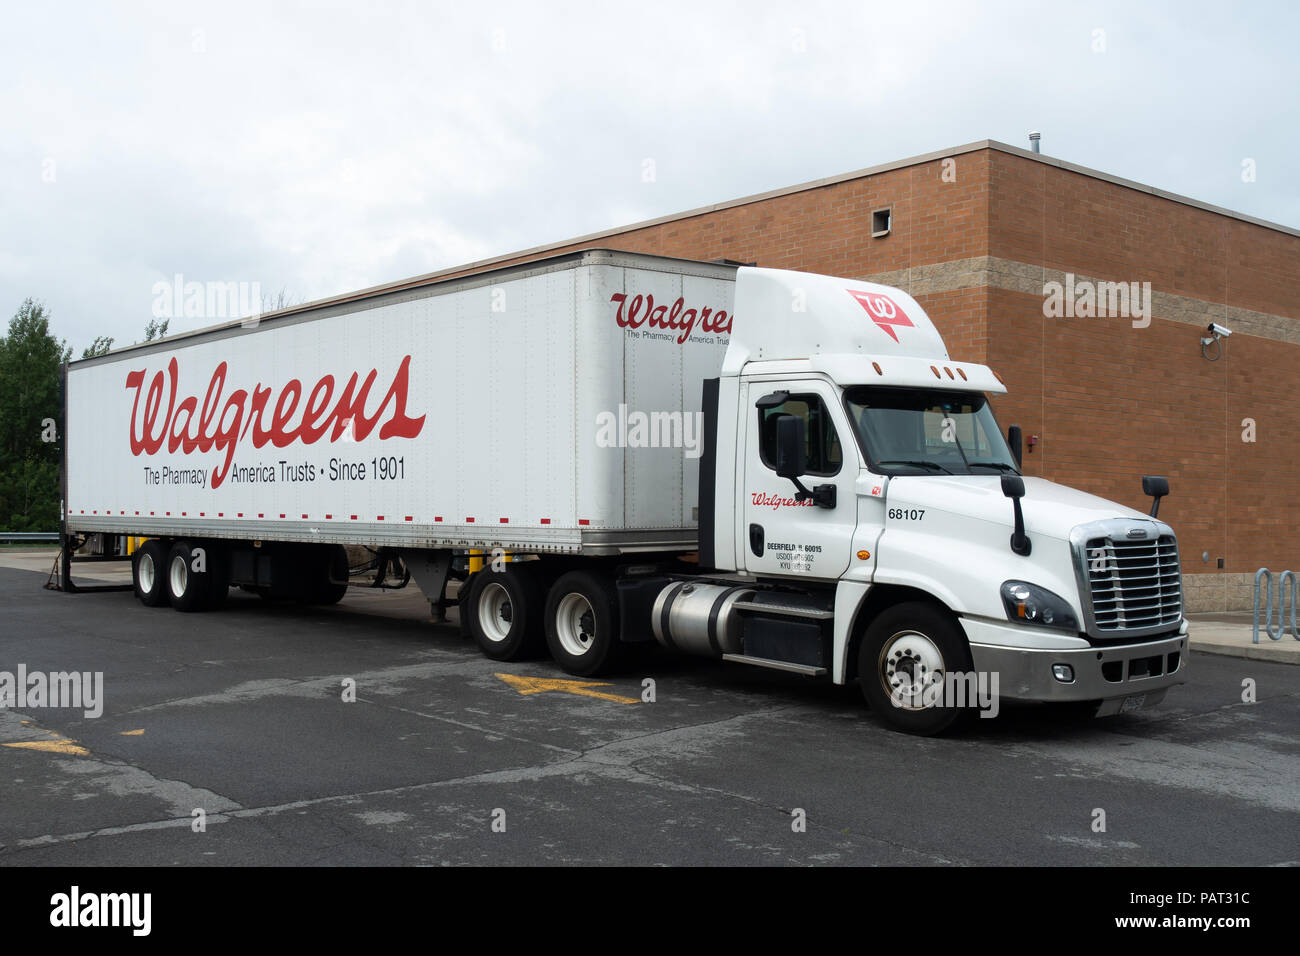 A white Walgreens semi-trailer truck or lorry delivering merchandise to their building in Gloversville, NY USA Stock Photo